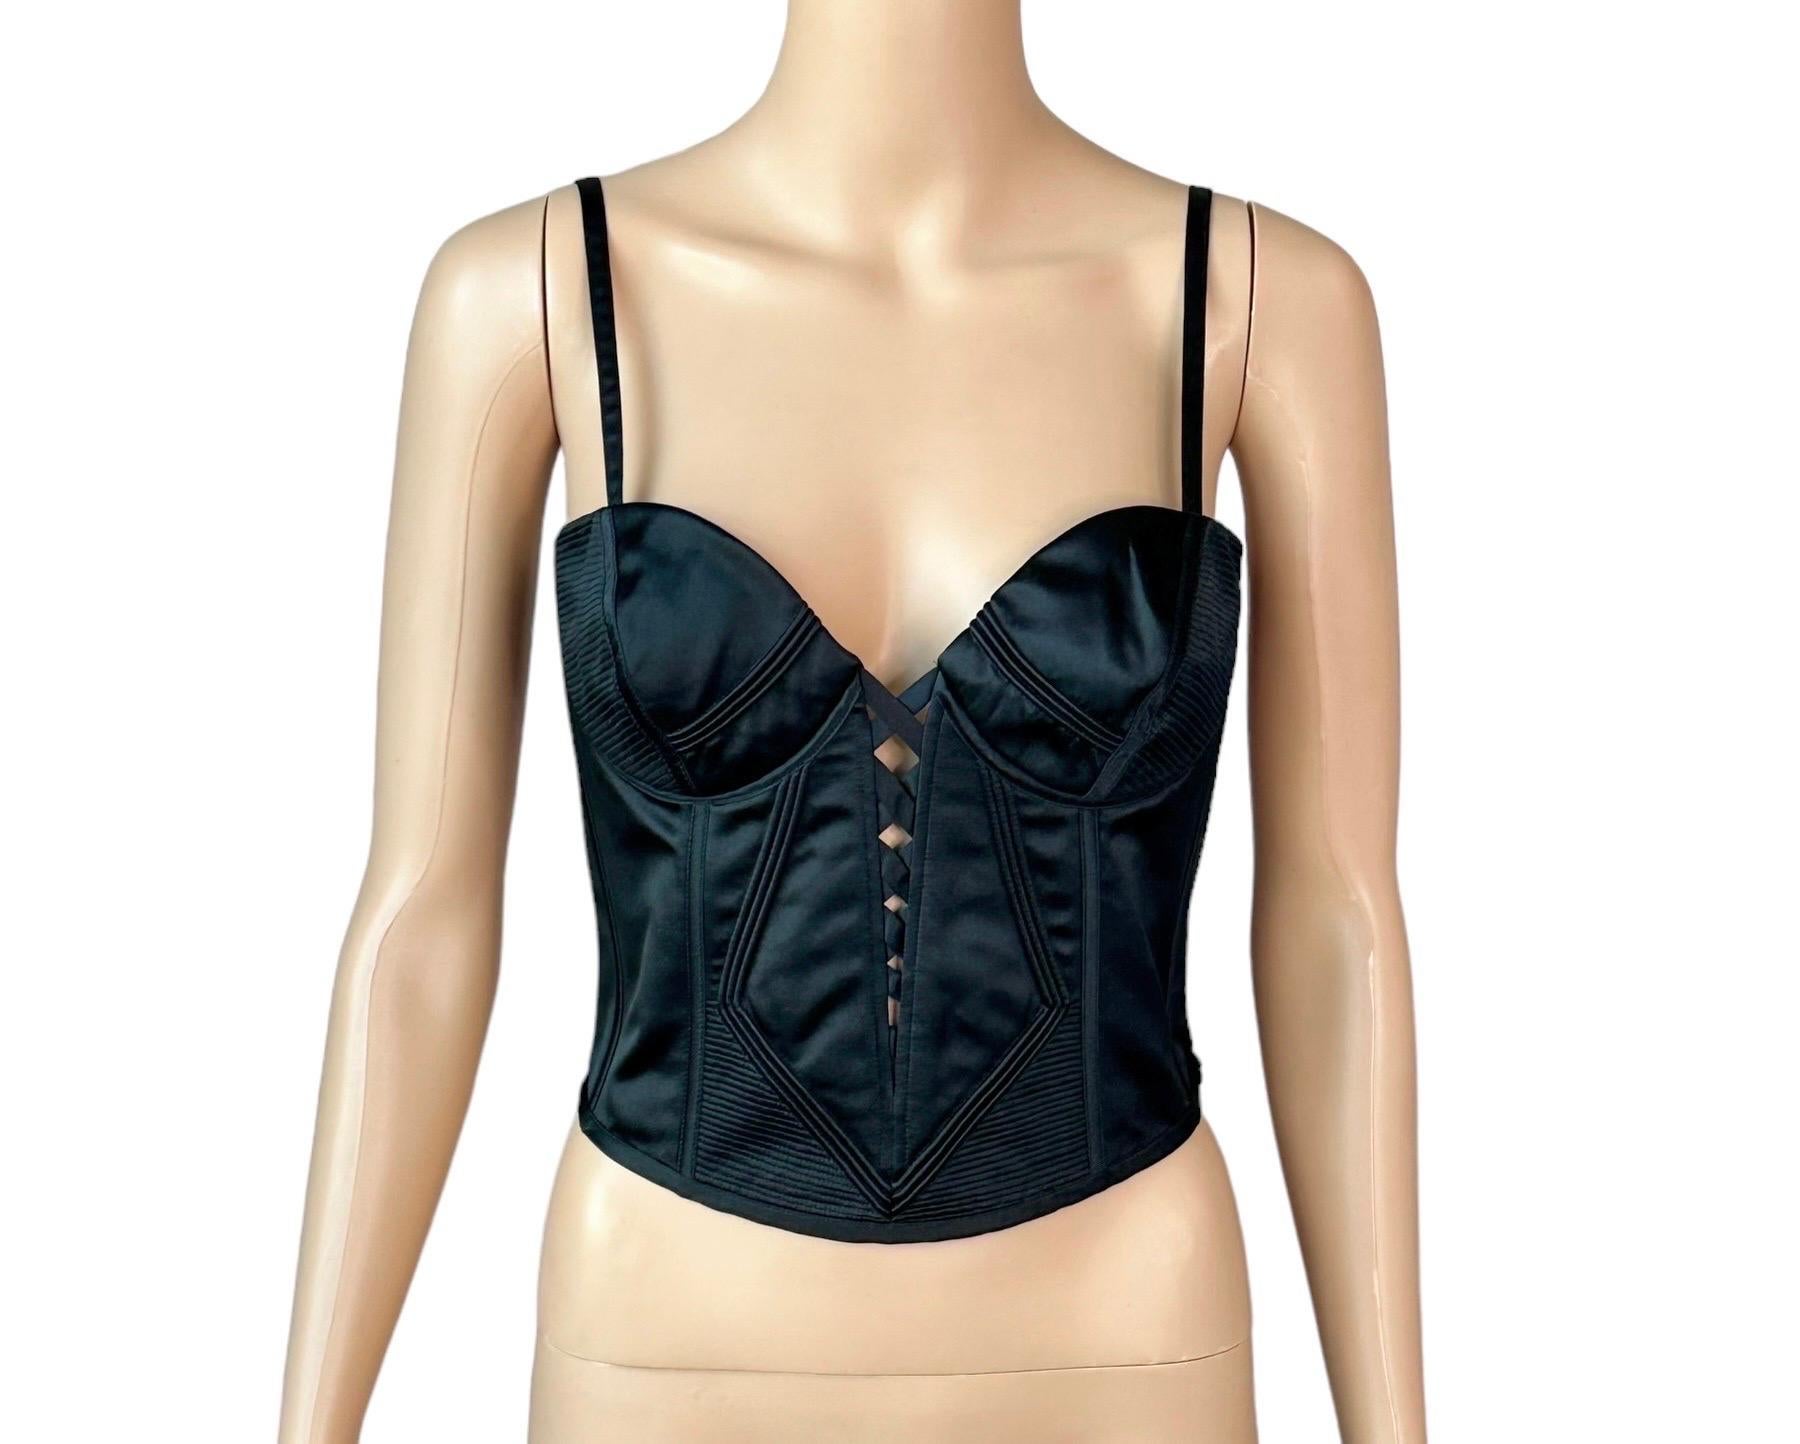 Gianni Versace S/S 1995 Plunged Bustier Corset Bra Silk Black Crop Top  In Good Condition For Sale In Naples, FL